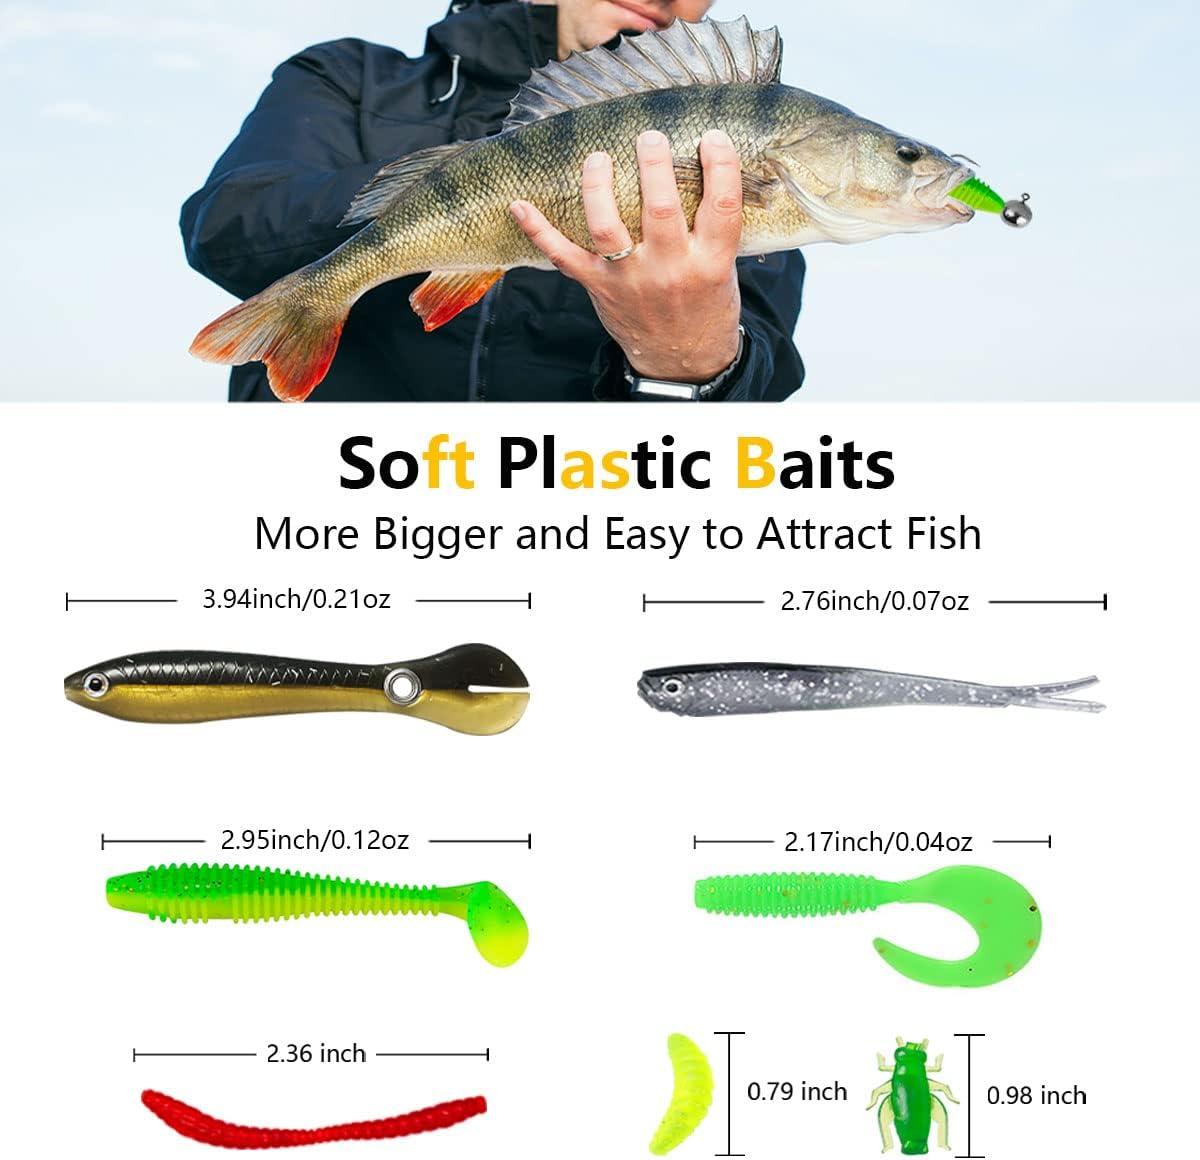 Jig silicone fishing lures in plastic tackle lure box. Silicone